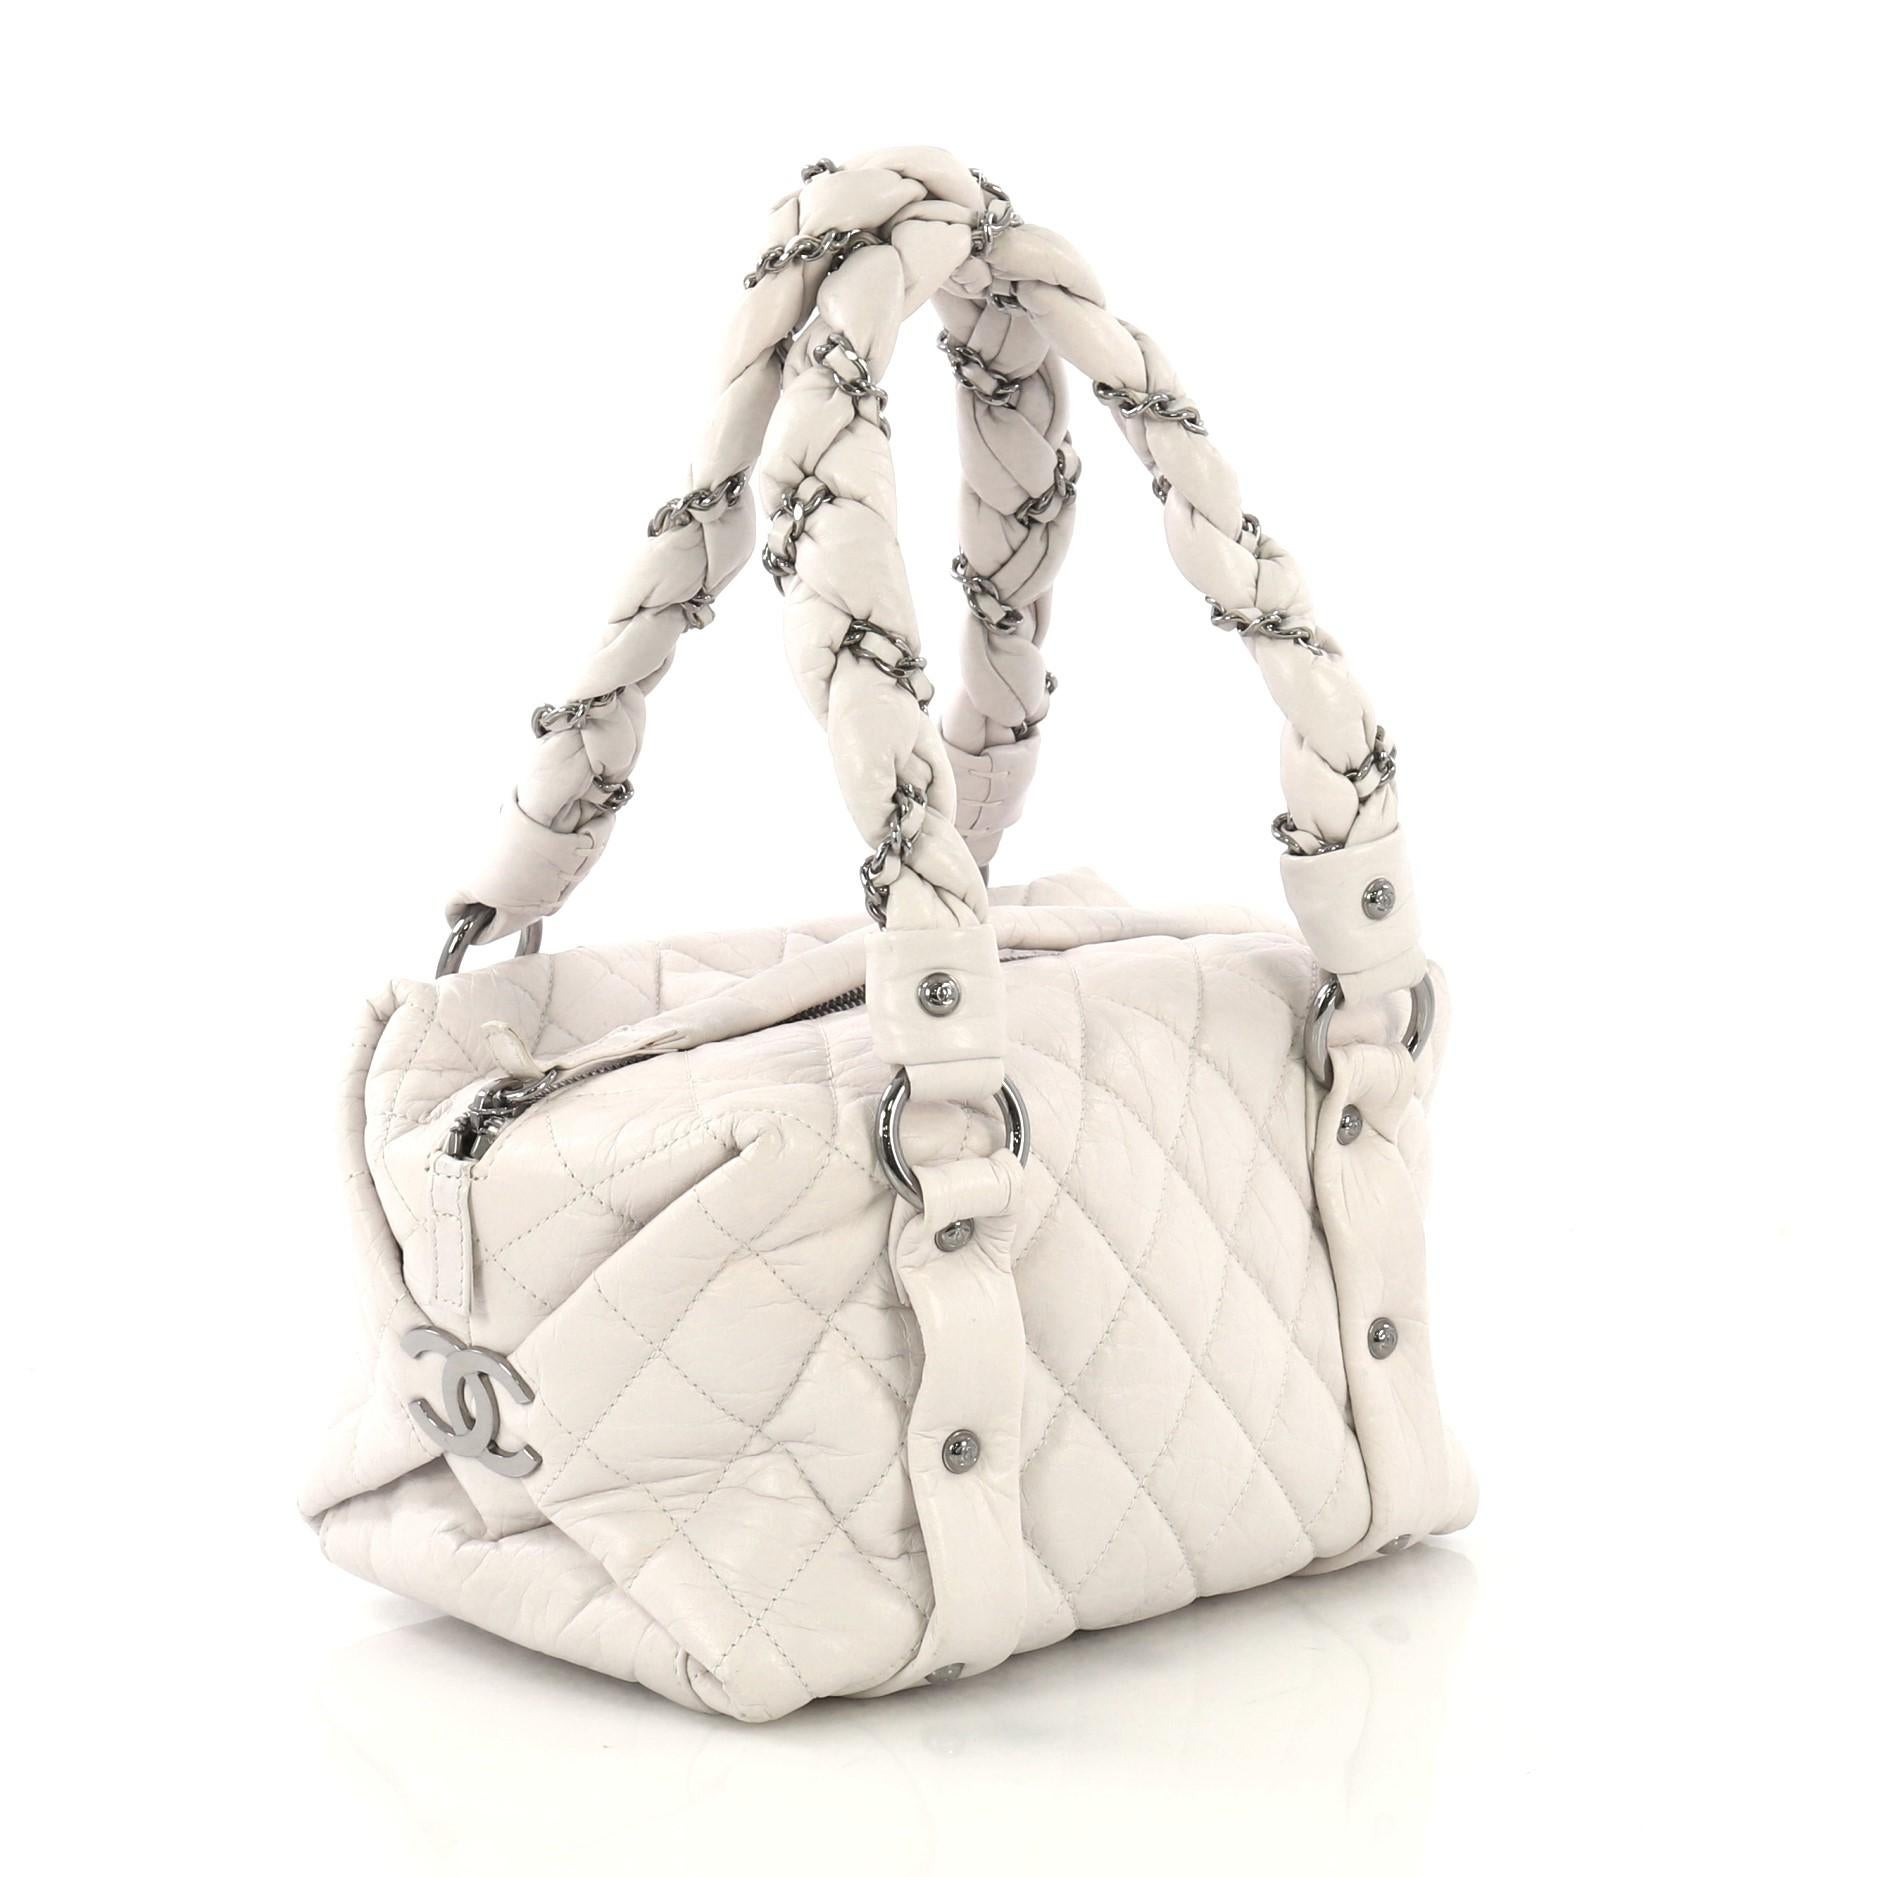 This Chanel Lady Braid Bowler Bag Quilted Distressed Lambskin Small, crafted from light grey quilted distressed leather, features intertwined woven leather chain straps, side CC logo details, and silver-tone hardware. Its top zip closure opens to a